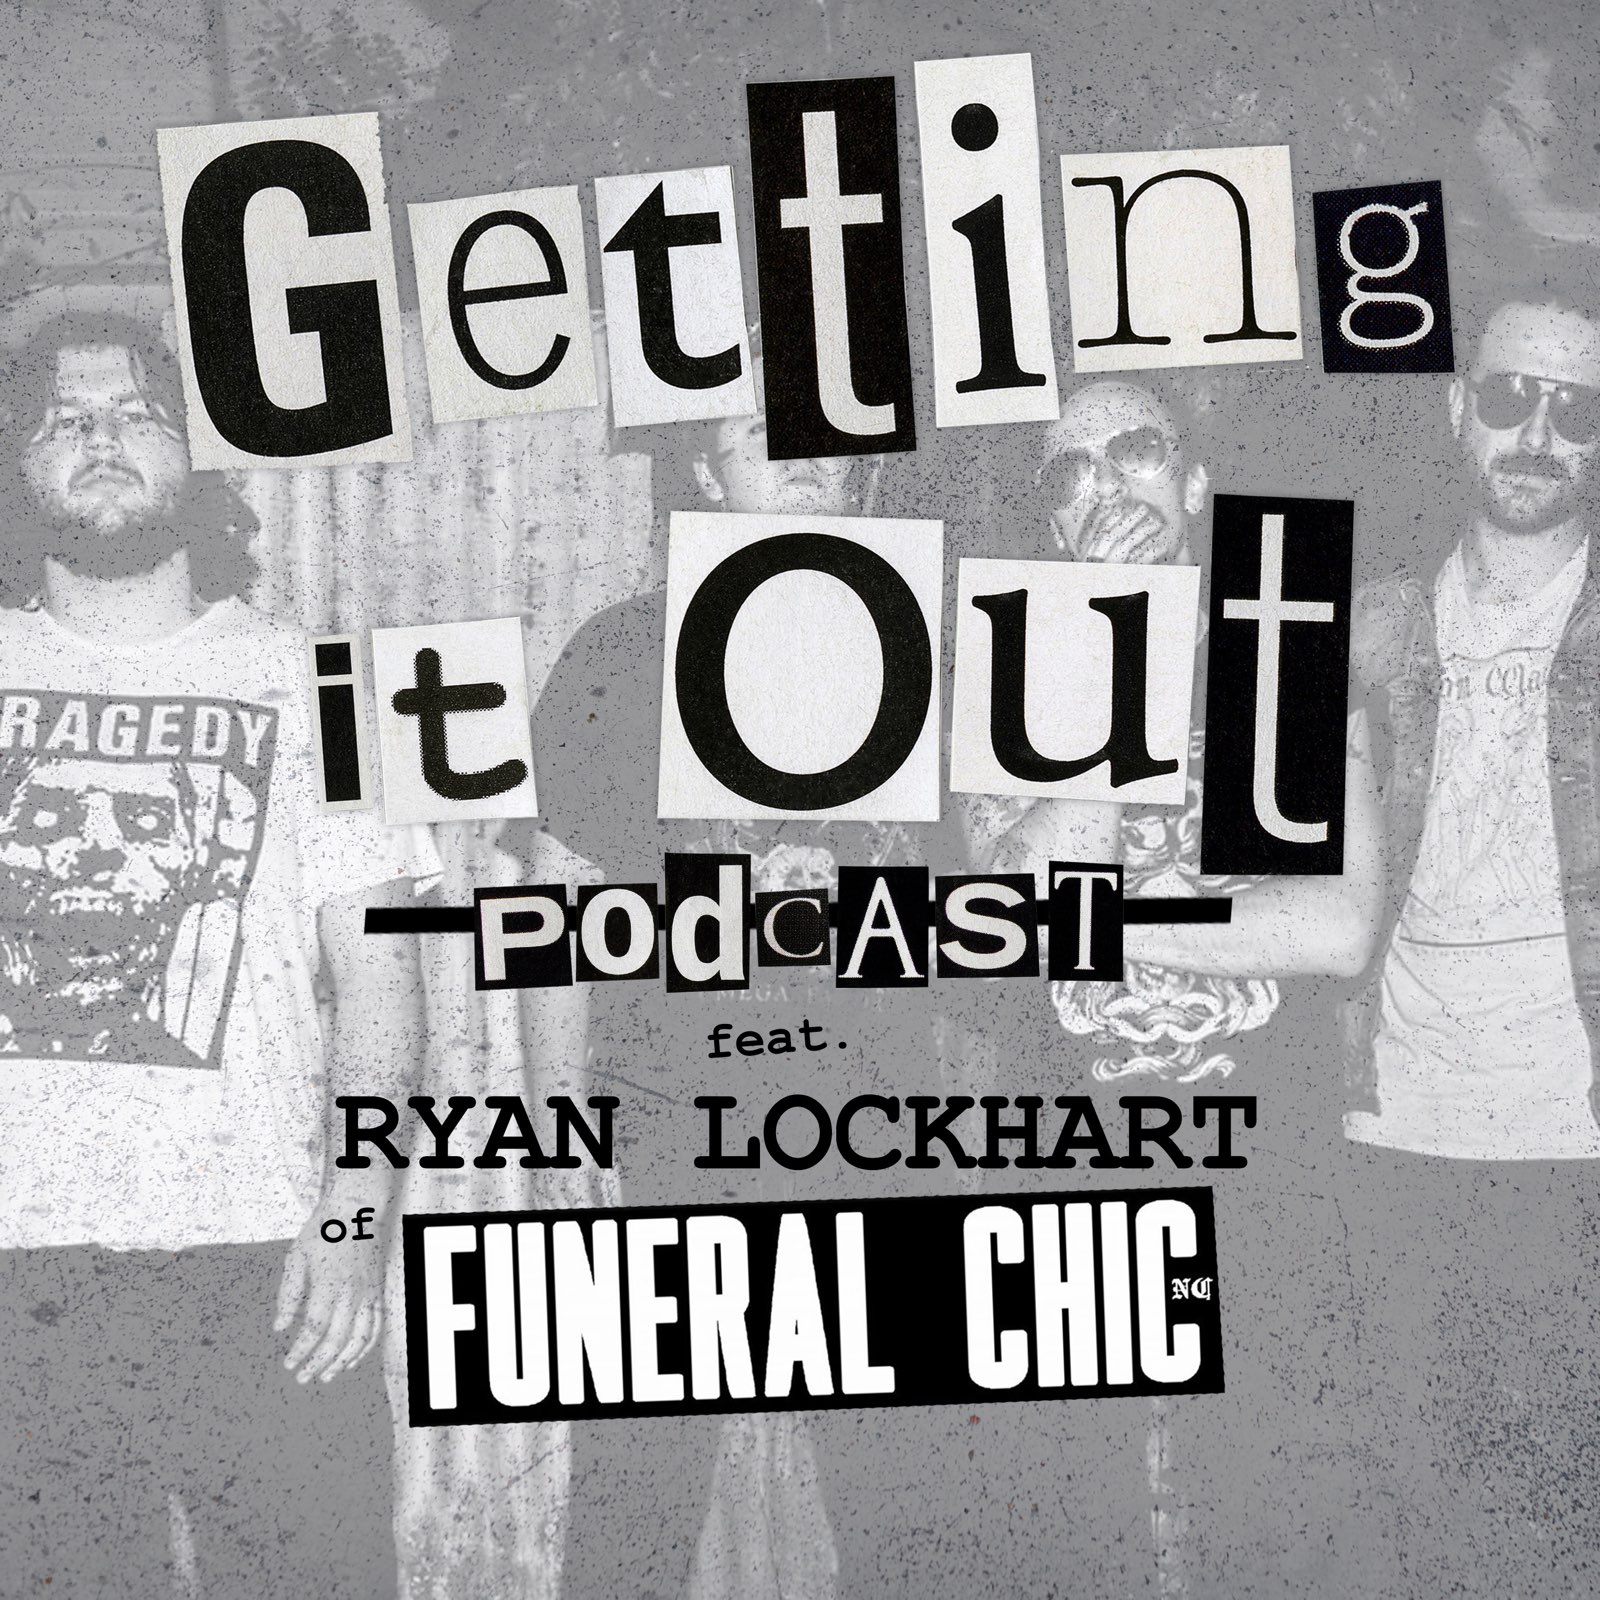 Episode 65 (Funeral Chic)